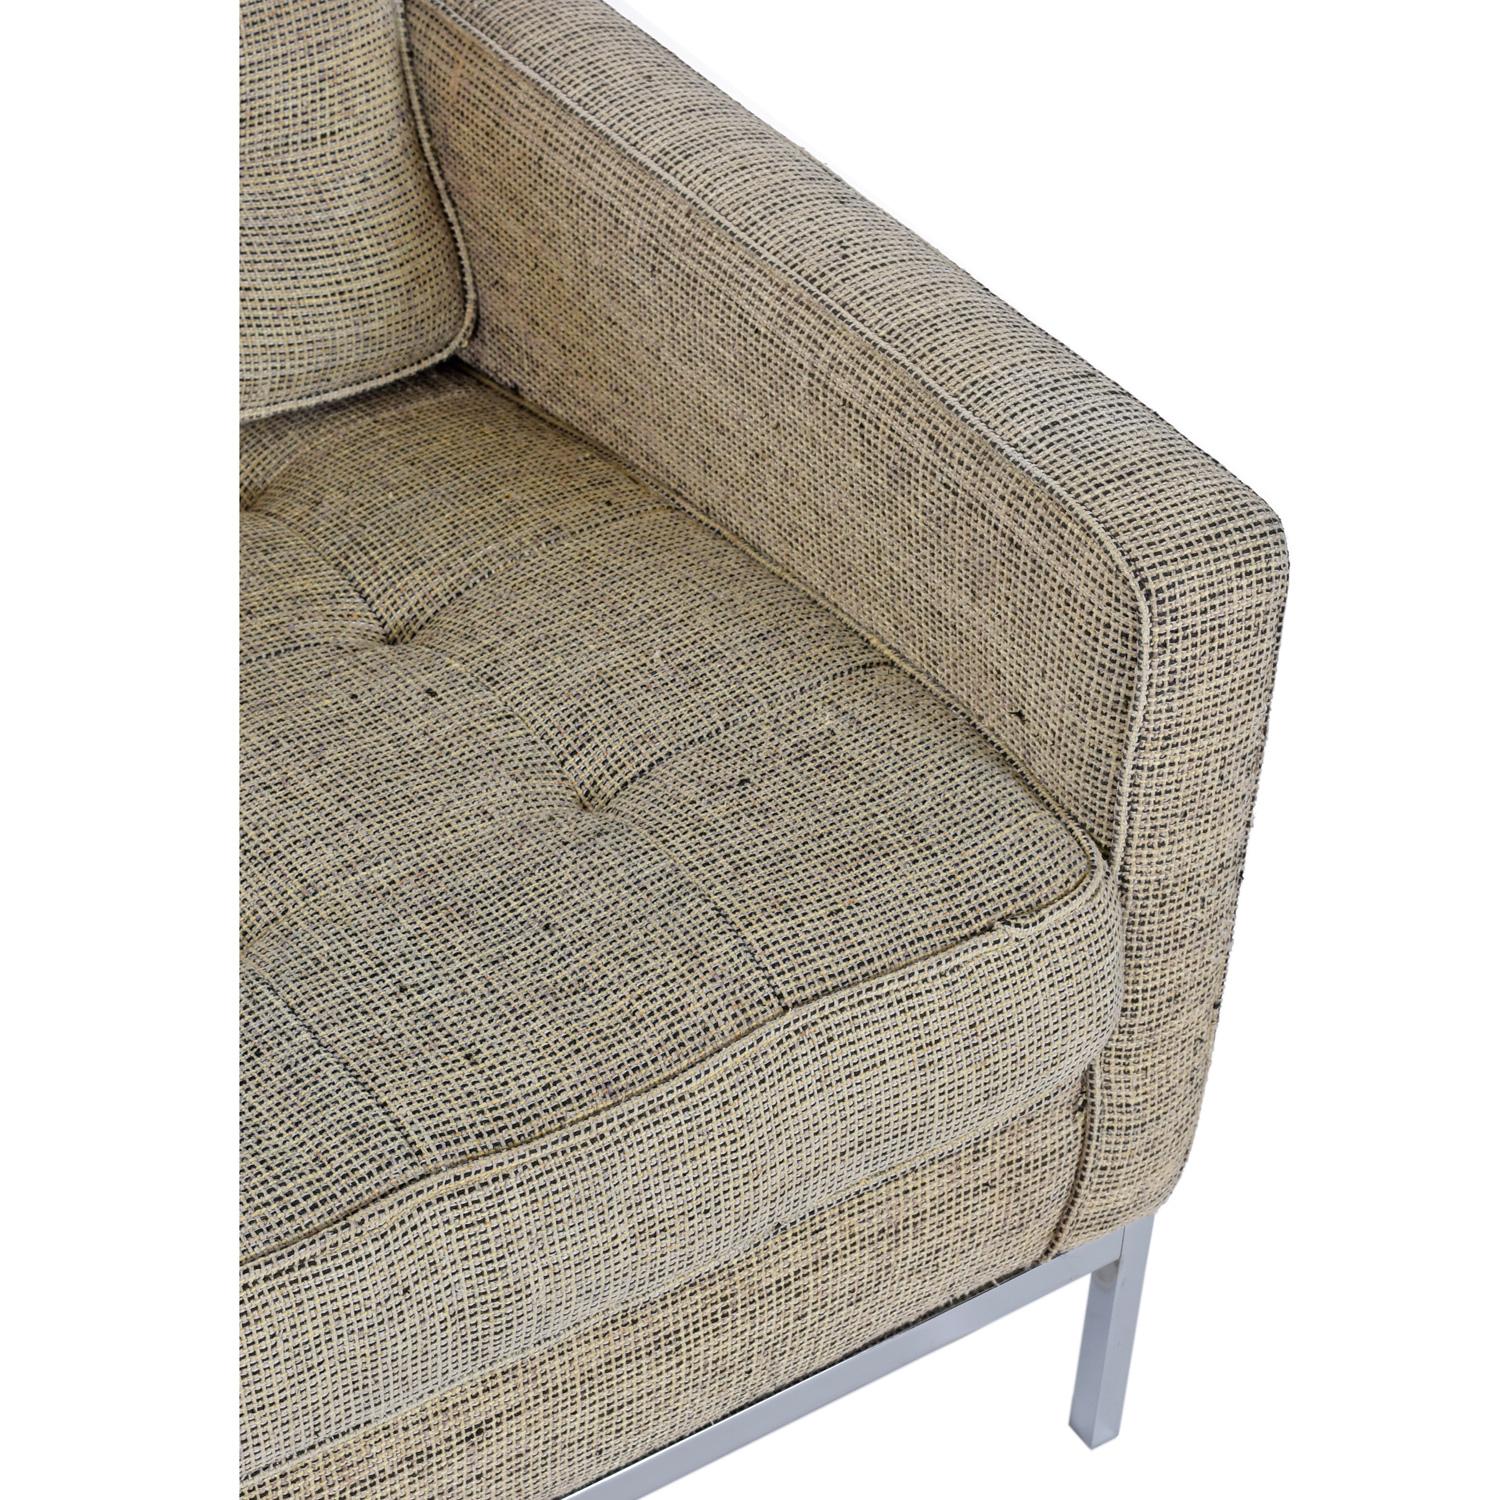 American Florence Knoll Lounge Chair on Steel Base in Heather Grey Tweed Fabric For Sale